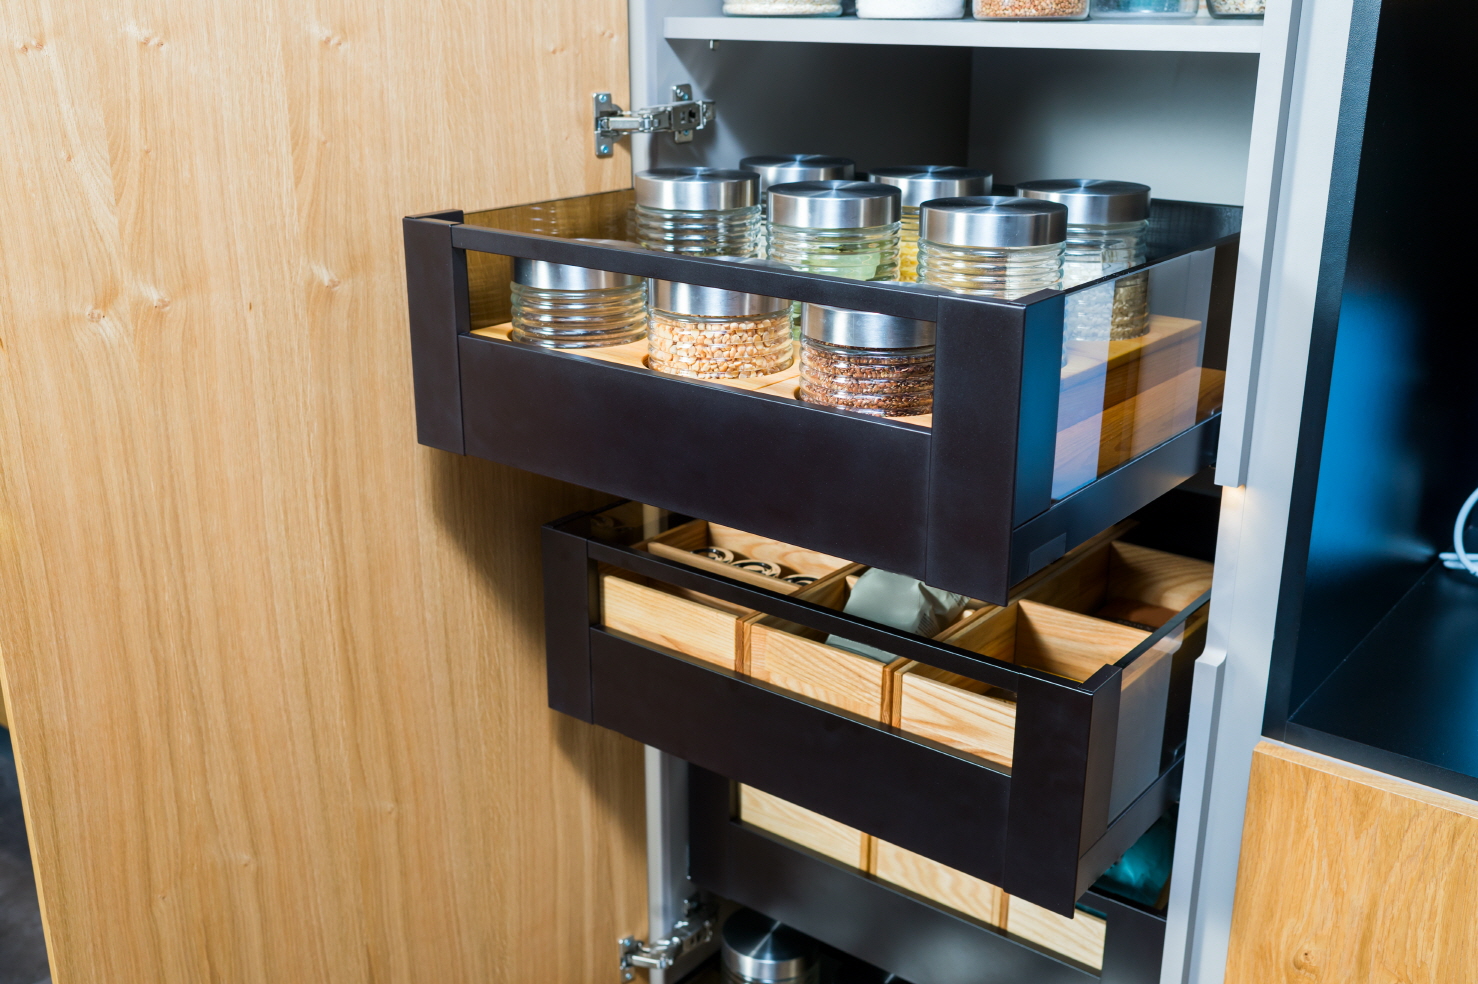 Install pull-out drawers on a track system for convenient access and hidden storage in your pantry, complementing open shelving.